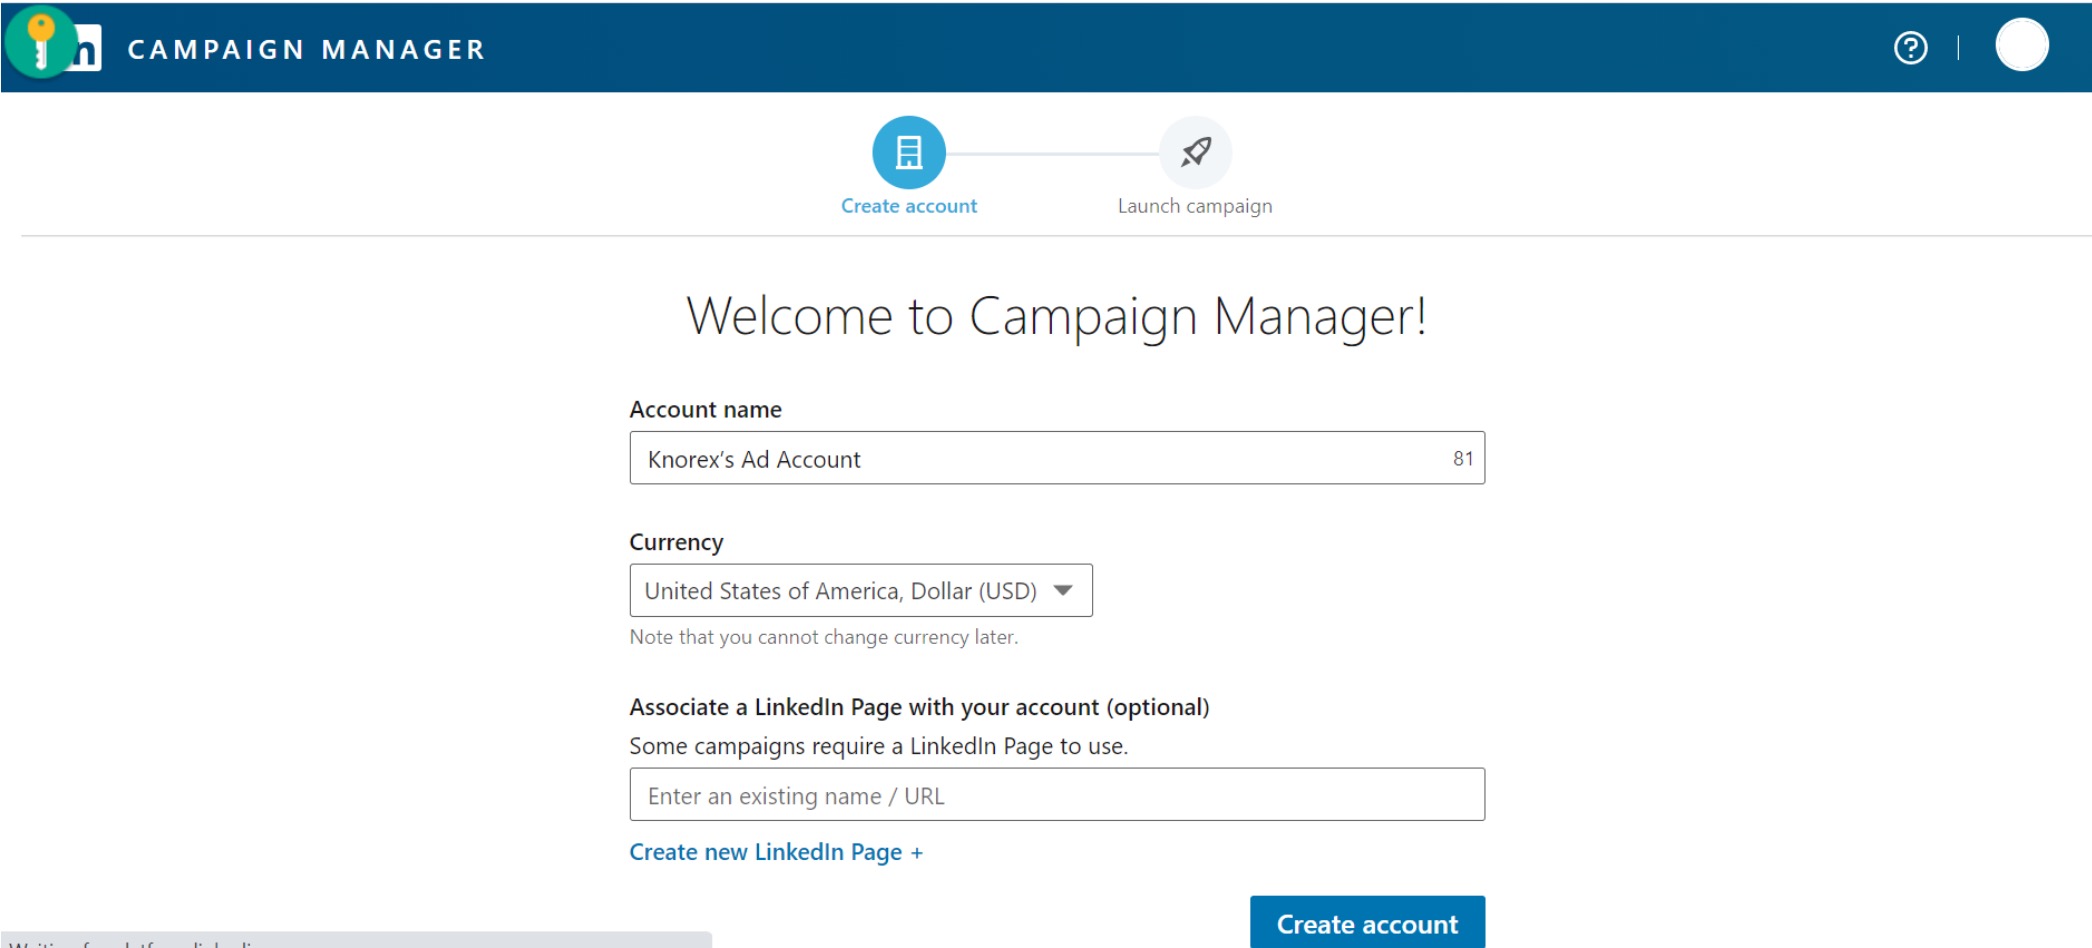 How Do I Create a LinkedIn Campaign in XPO? - KNOREX XPO Help Center